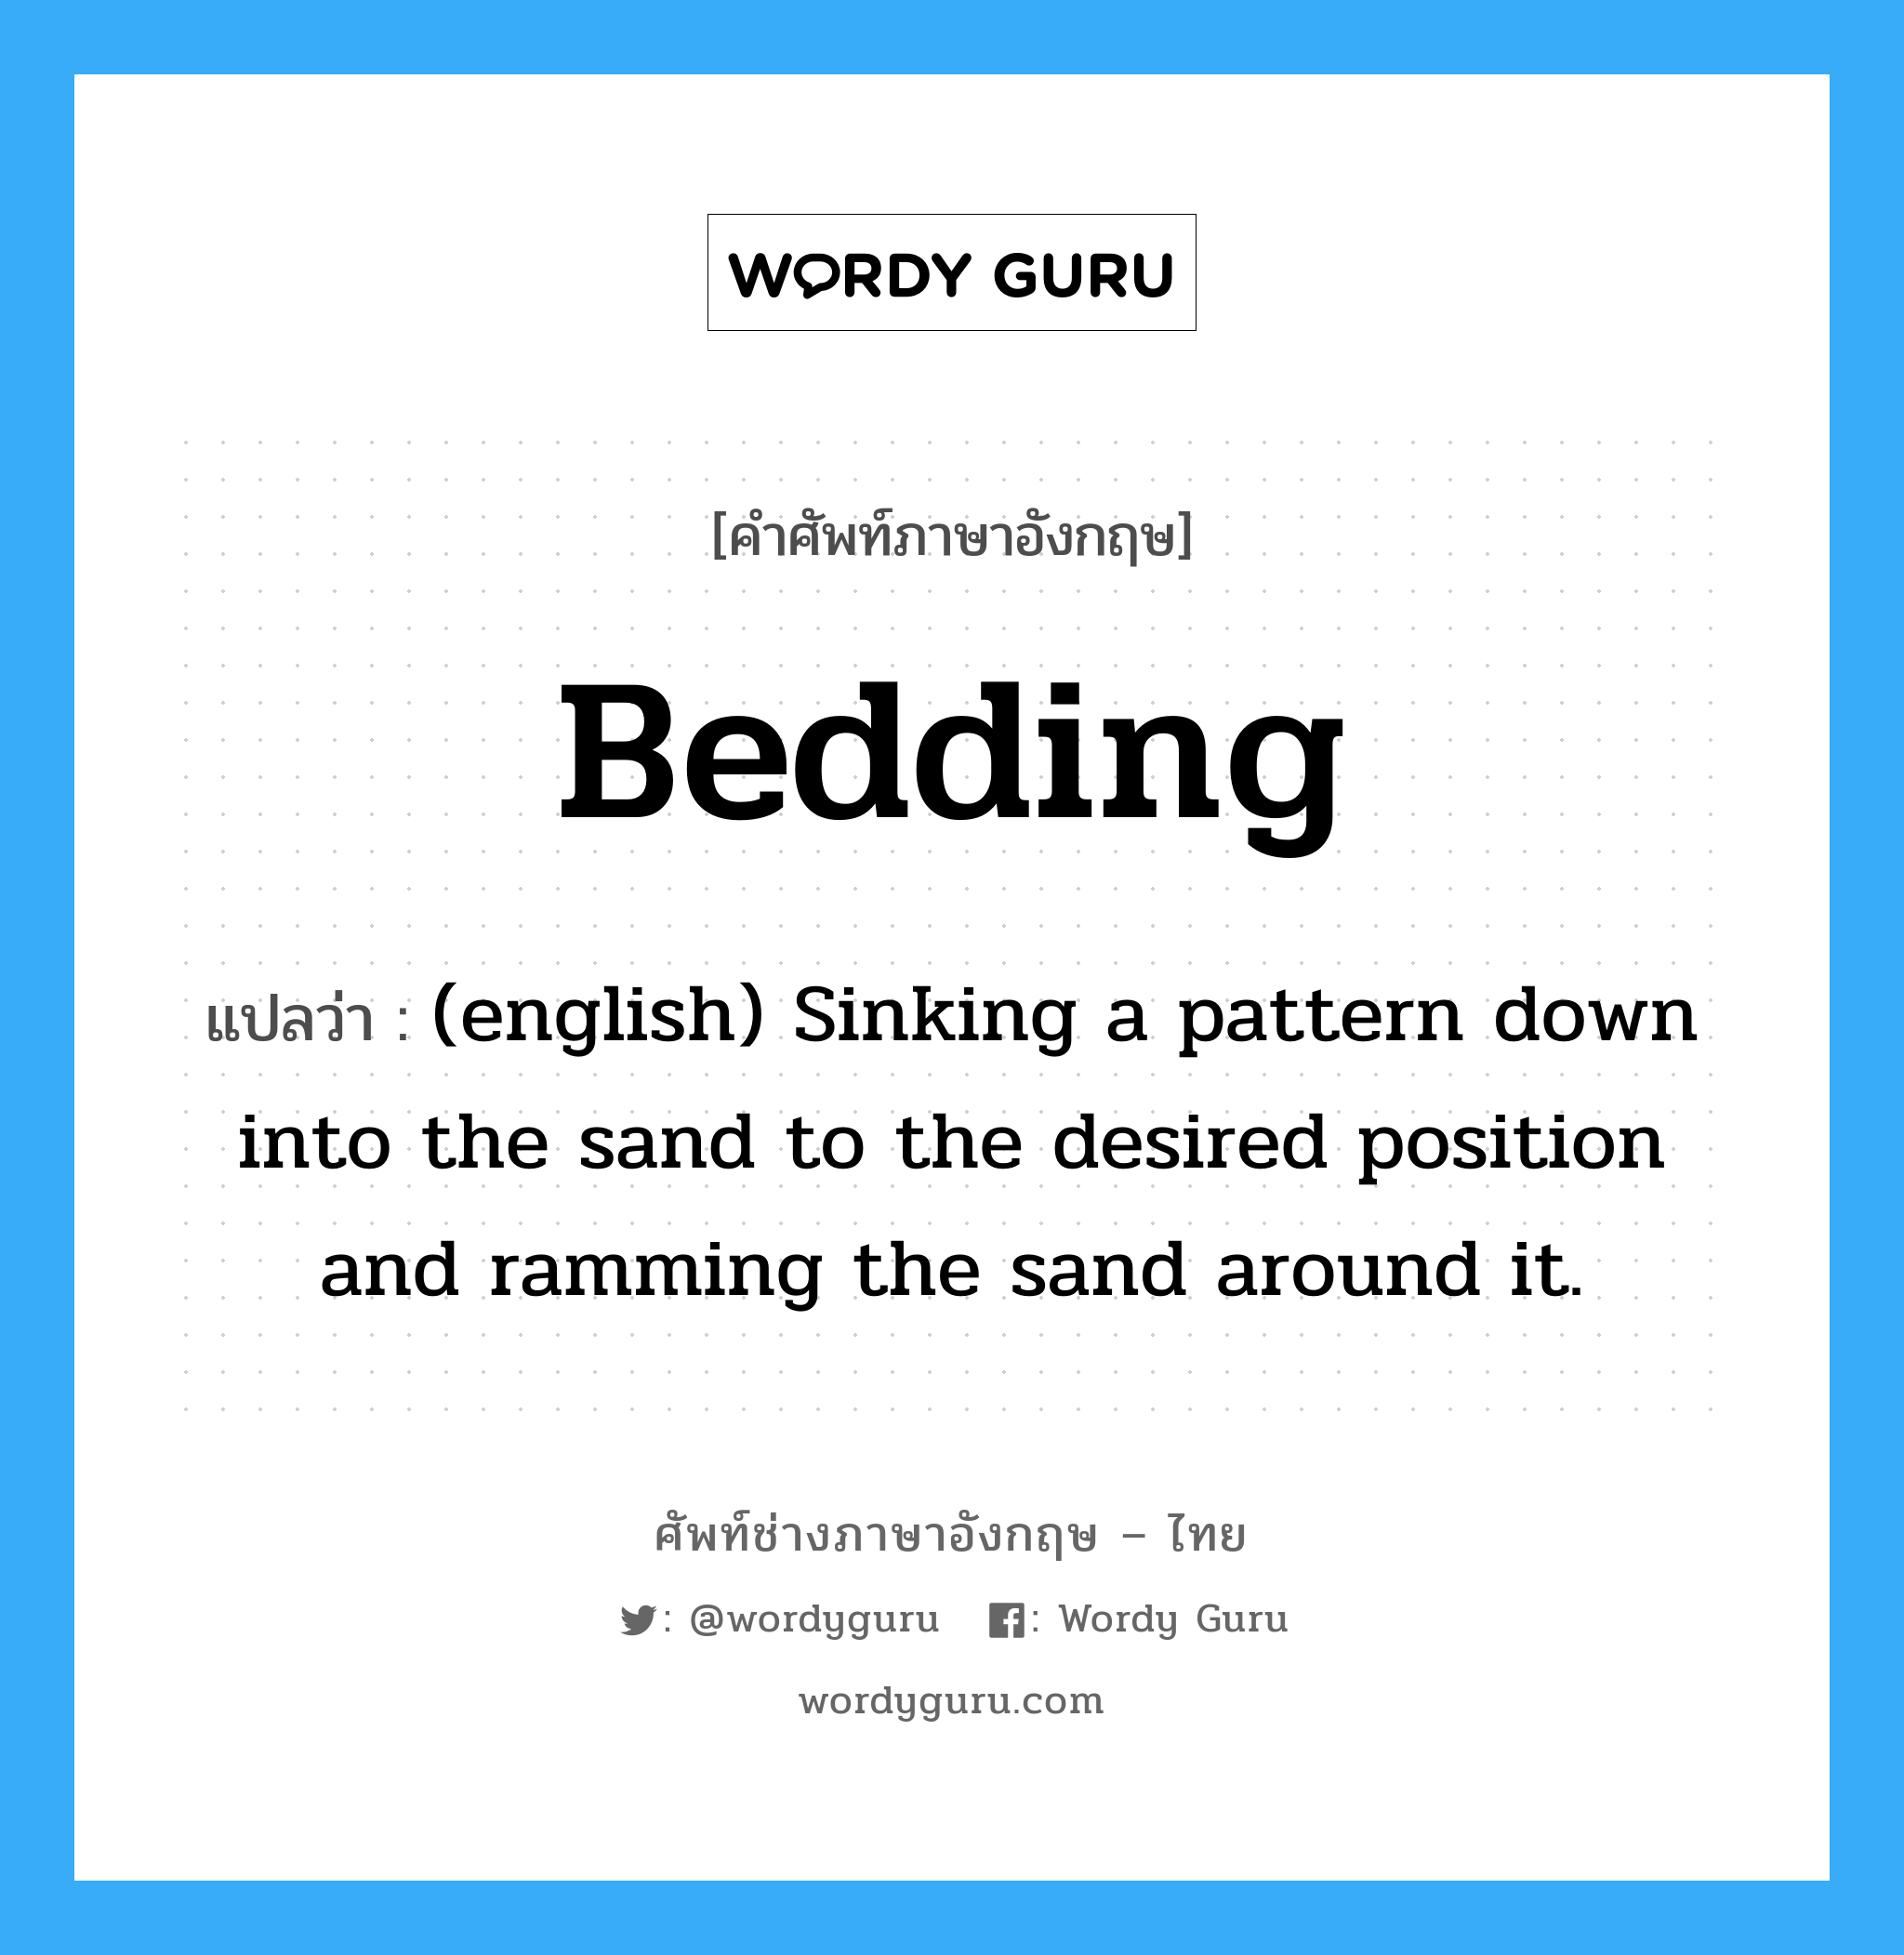 Bedding แปลว่า?, คำศัพท์ช่างภาษาอังกฤษ - ไทย Bedding คำศัพท์ภาษาอังกฤษ Bedding แปลว่า (english) Sinking a pattern down into the sand to the desired position and ramming the sand around it.